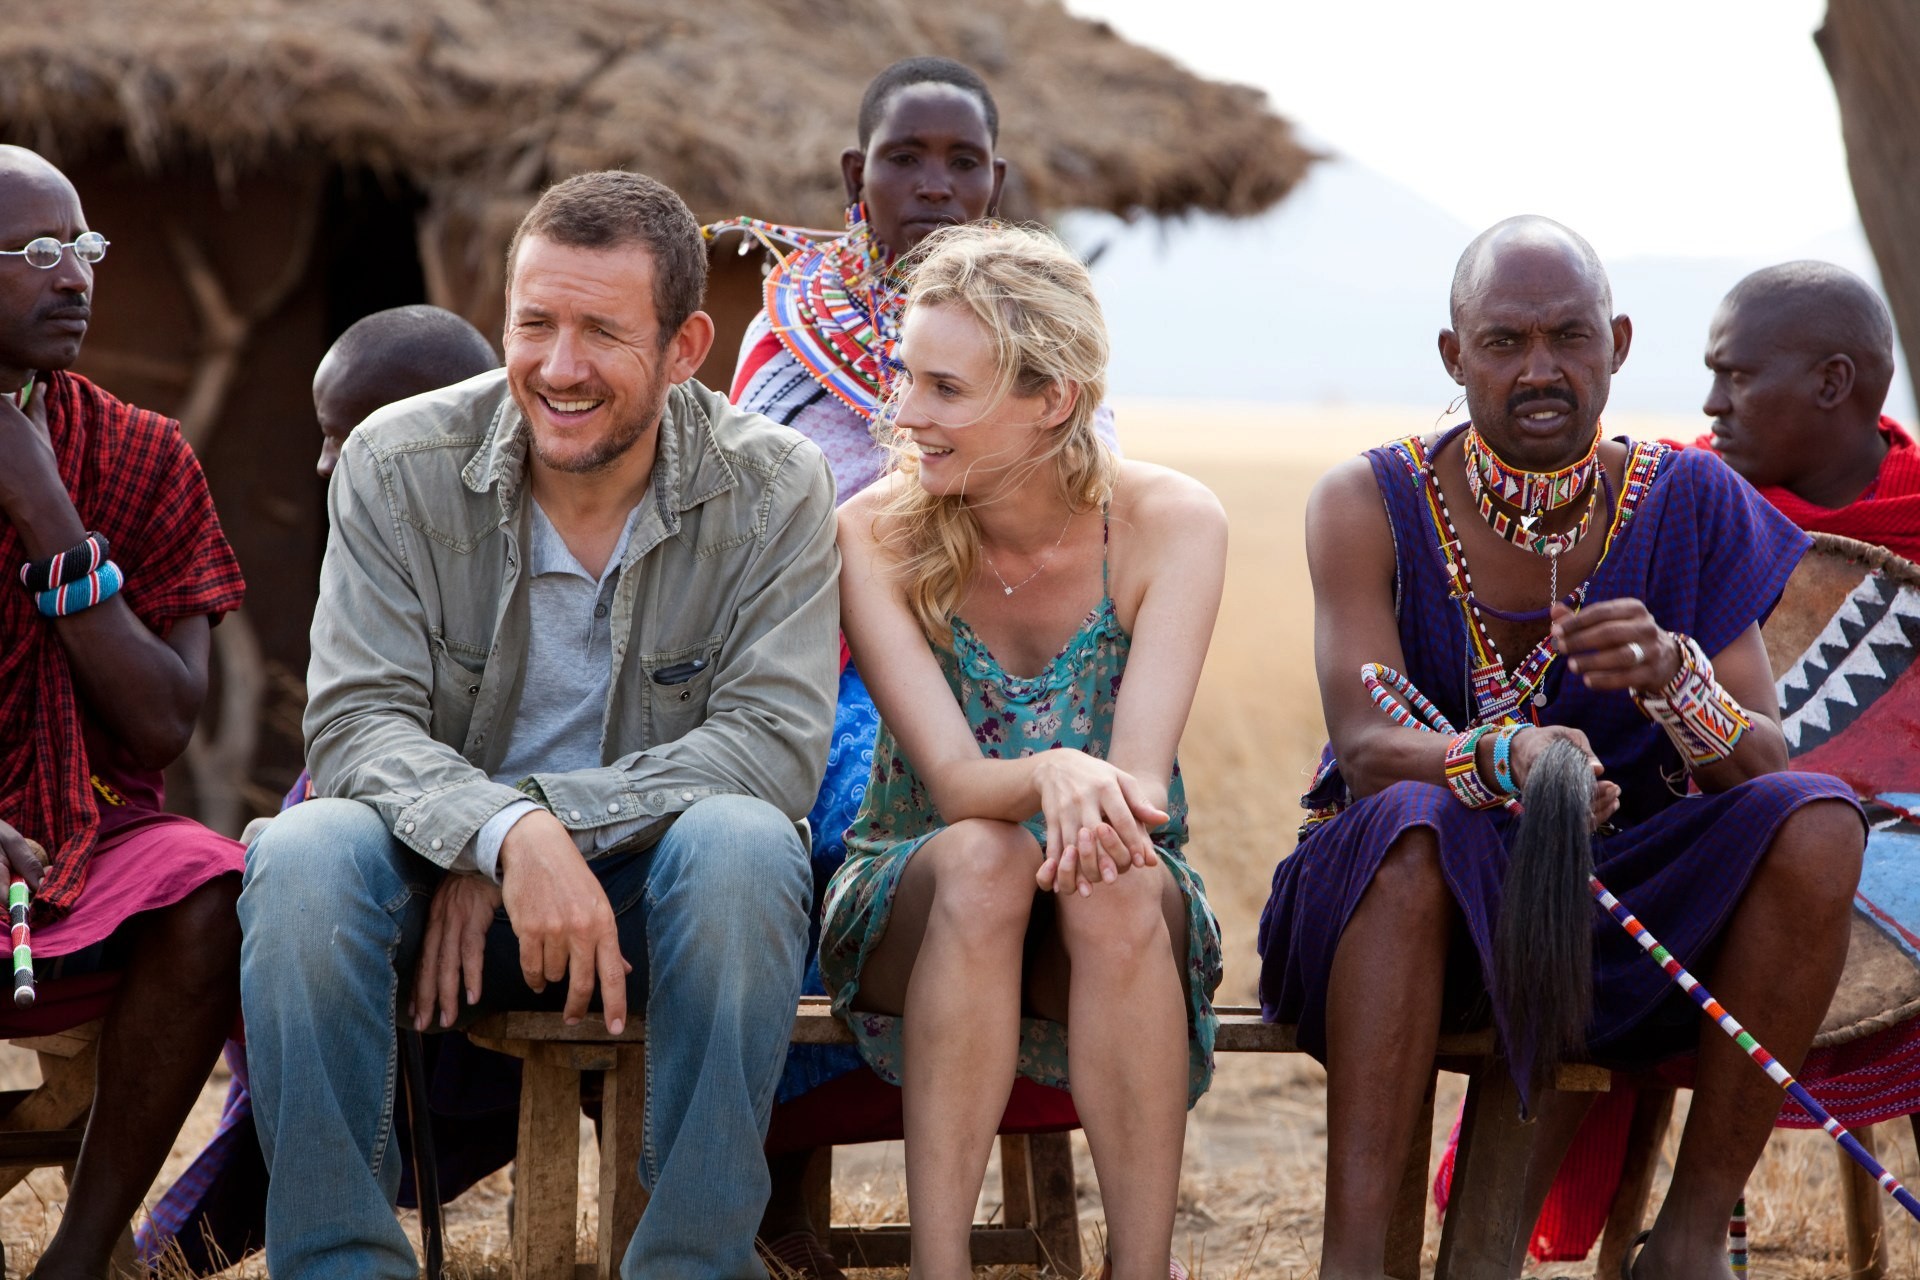 Dany Boon stars as Jean-Yves and Diane Kruger stars as Isabelle in Universal Pictures International's Un Plan Parfait (2012)